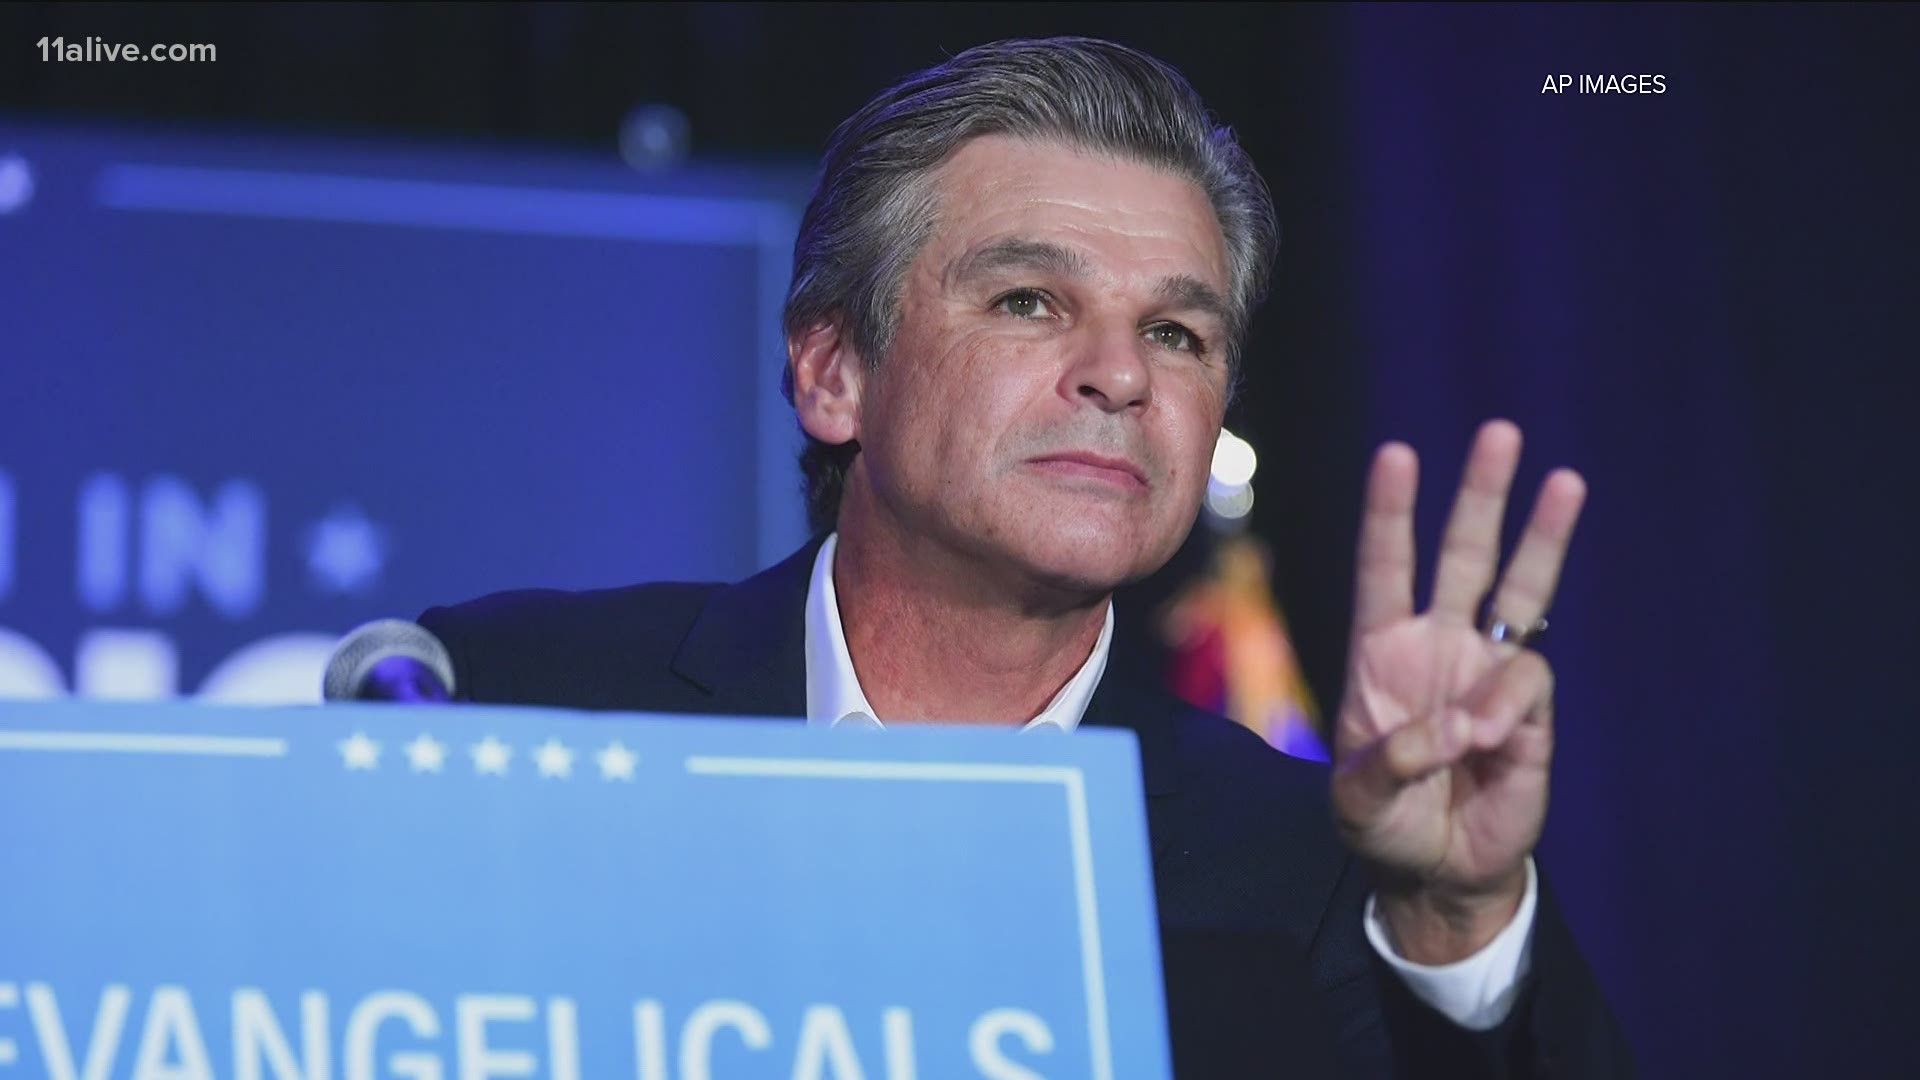 Jentezen Franklin tested positive for COVID-19 after coming in contact with someone from the congregation who had the virus, the church said.